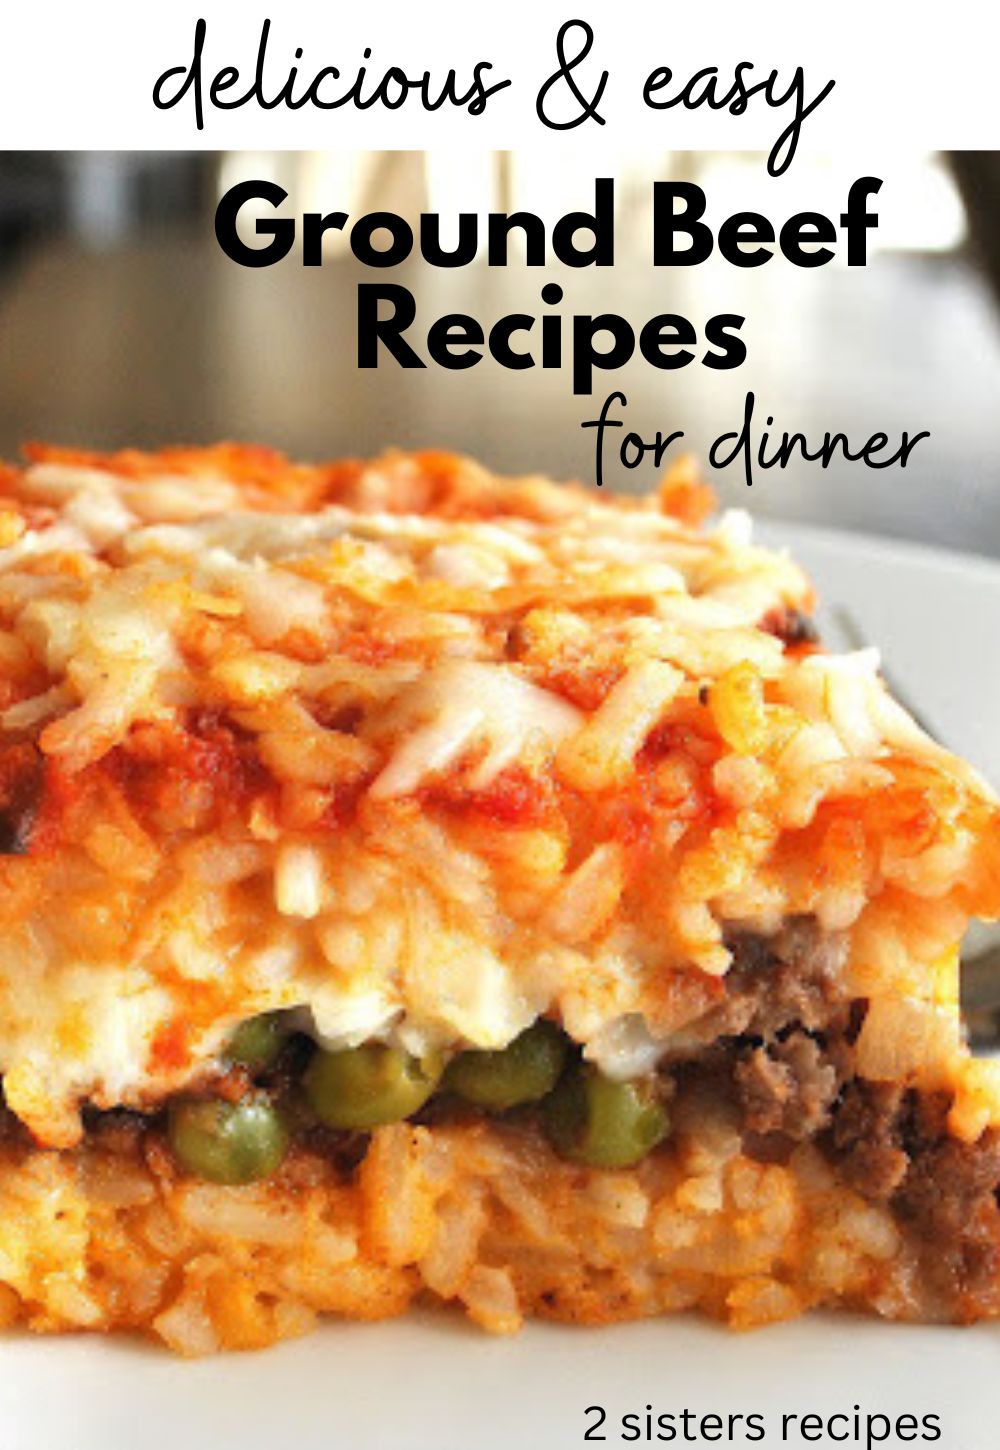 14 Easy Ground Beef Recipes for Dinner - 2 Sisters Recipes by Anna and Liz